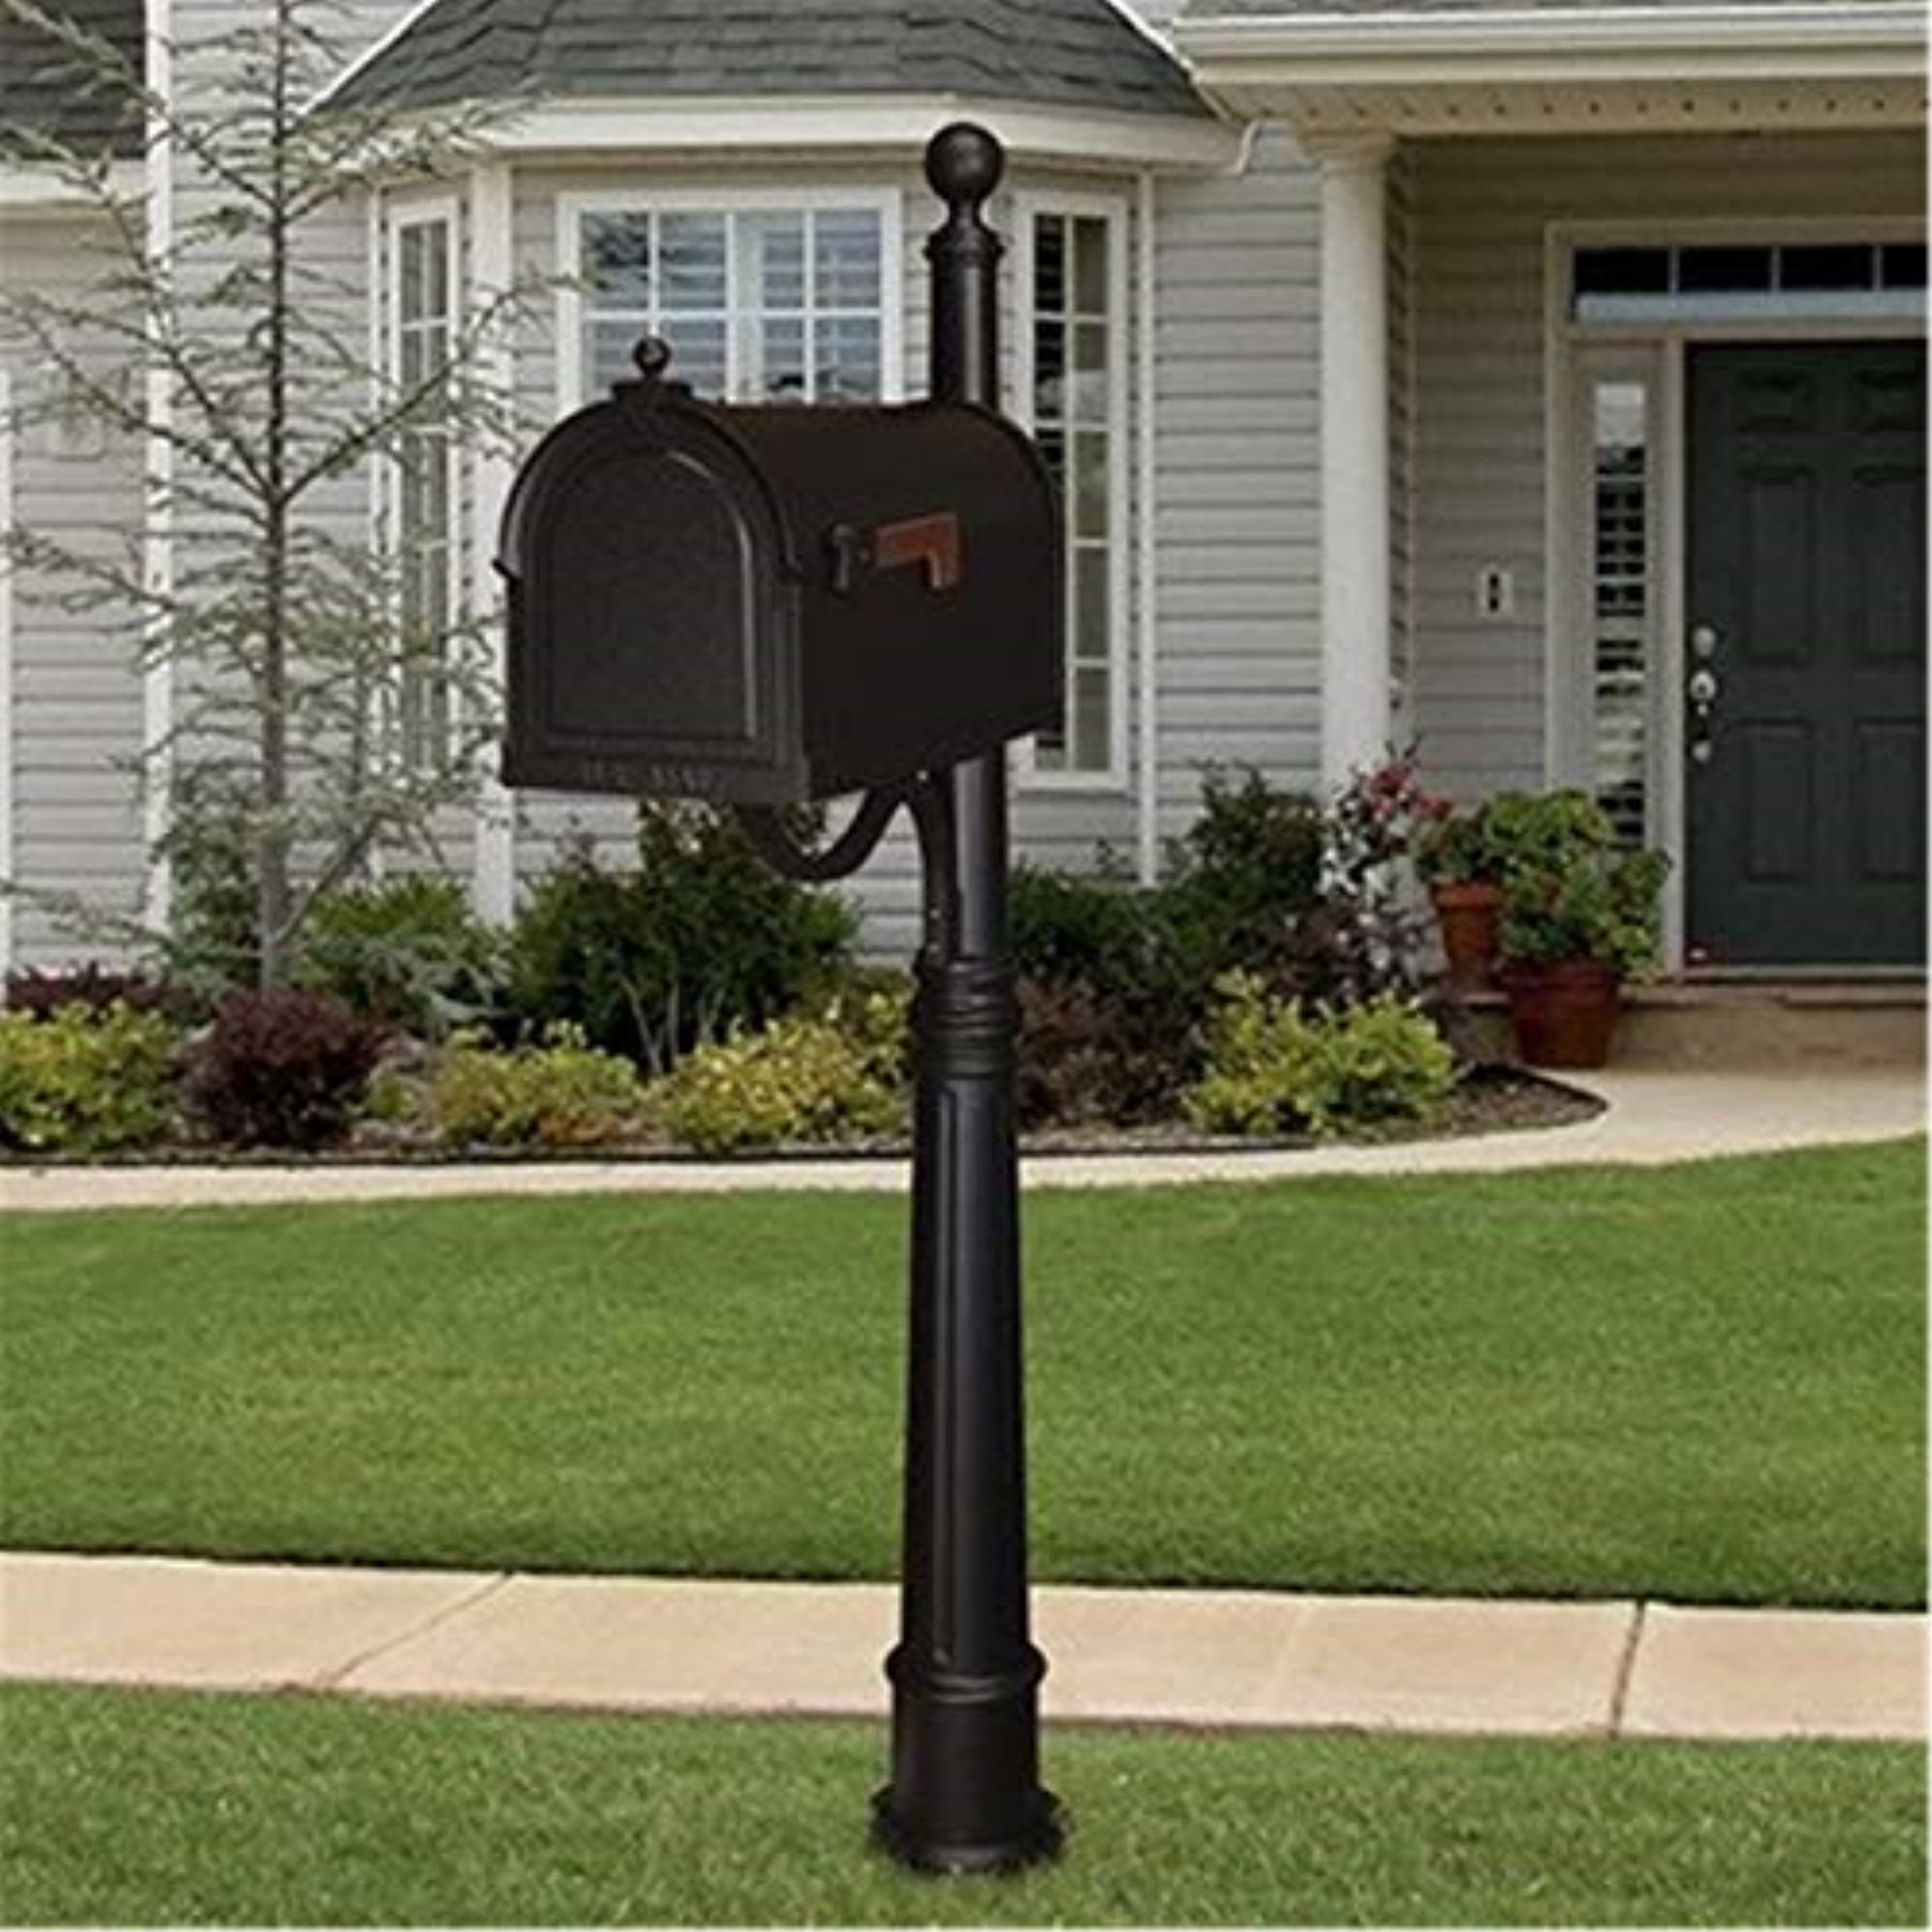 will not rust ALUMINUM FLAG REPLACEMENT KIT Fits most curbside mailboxes 